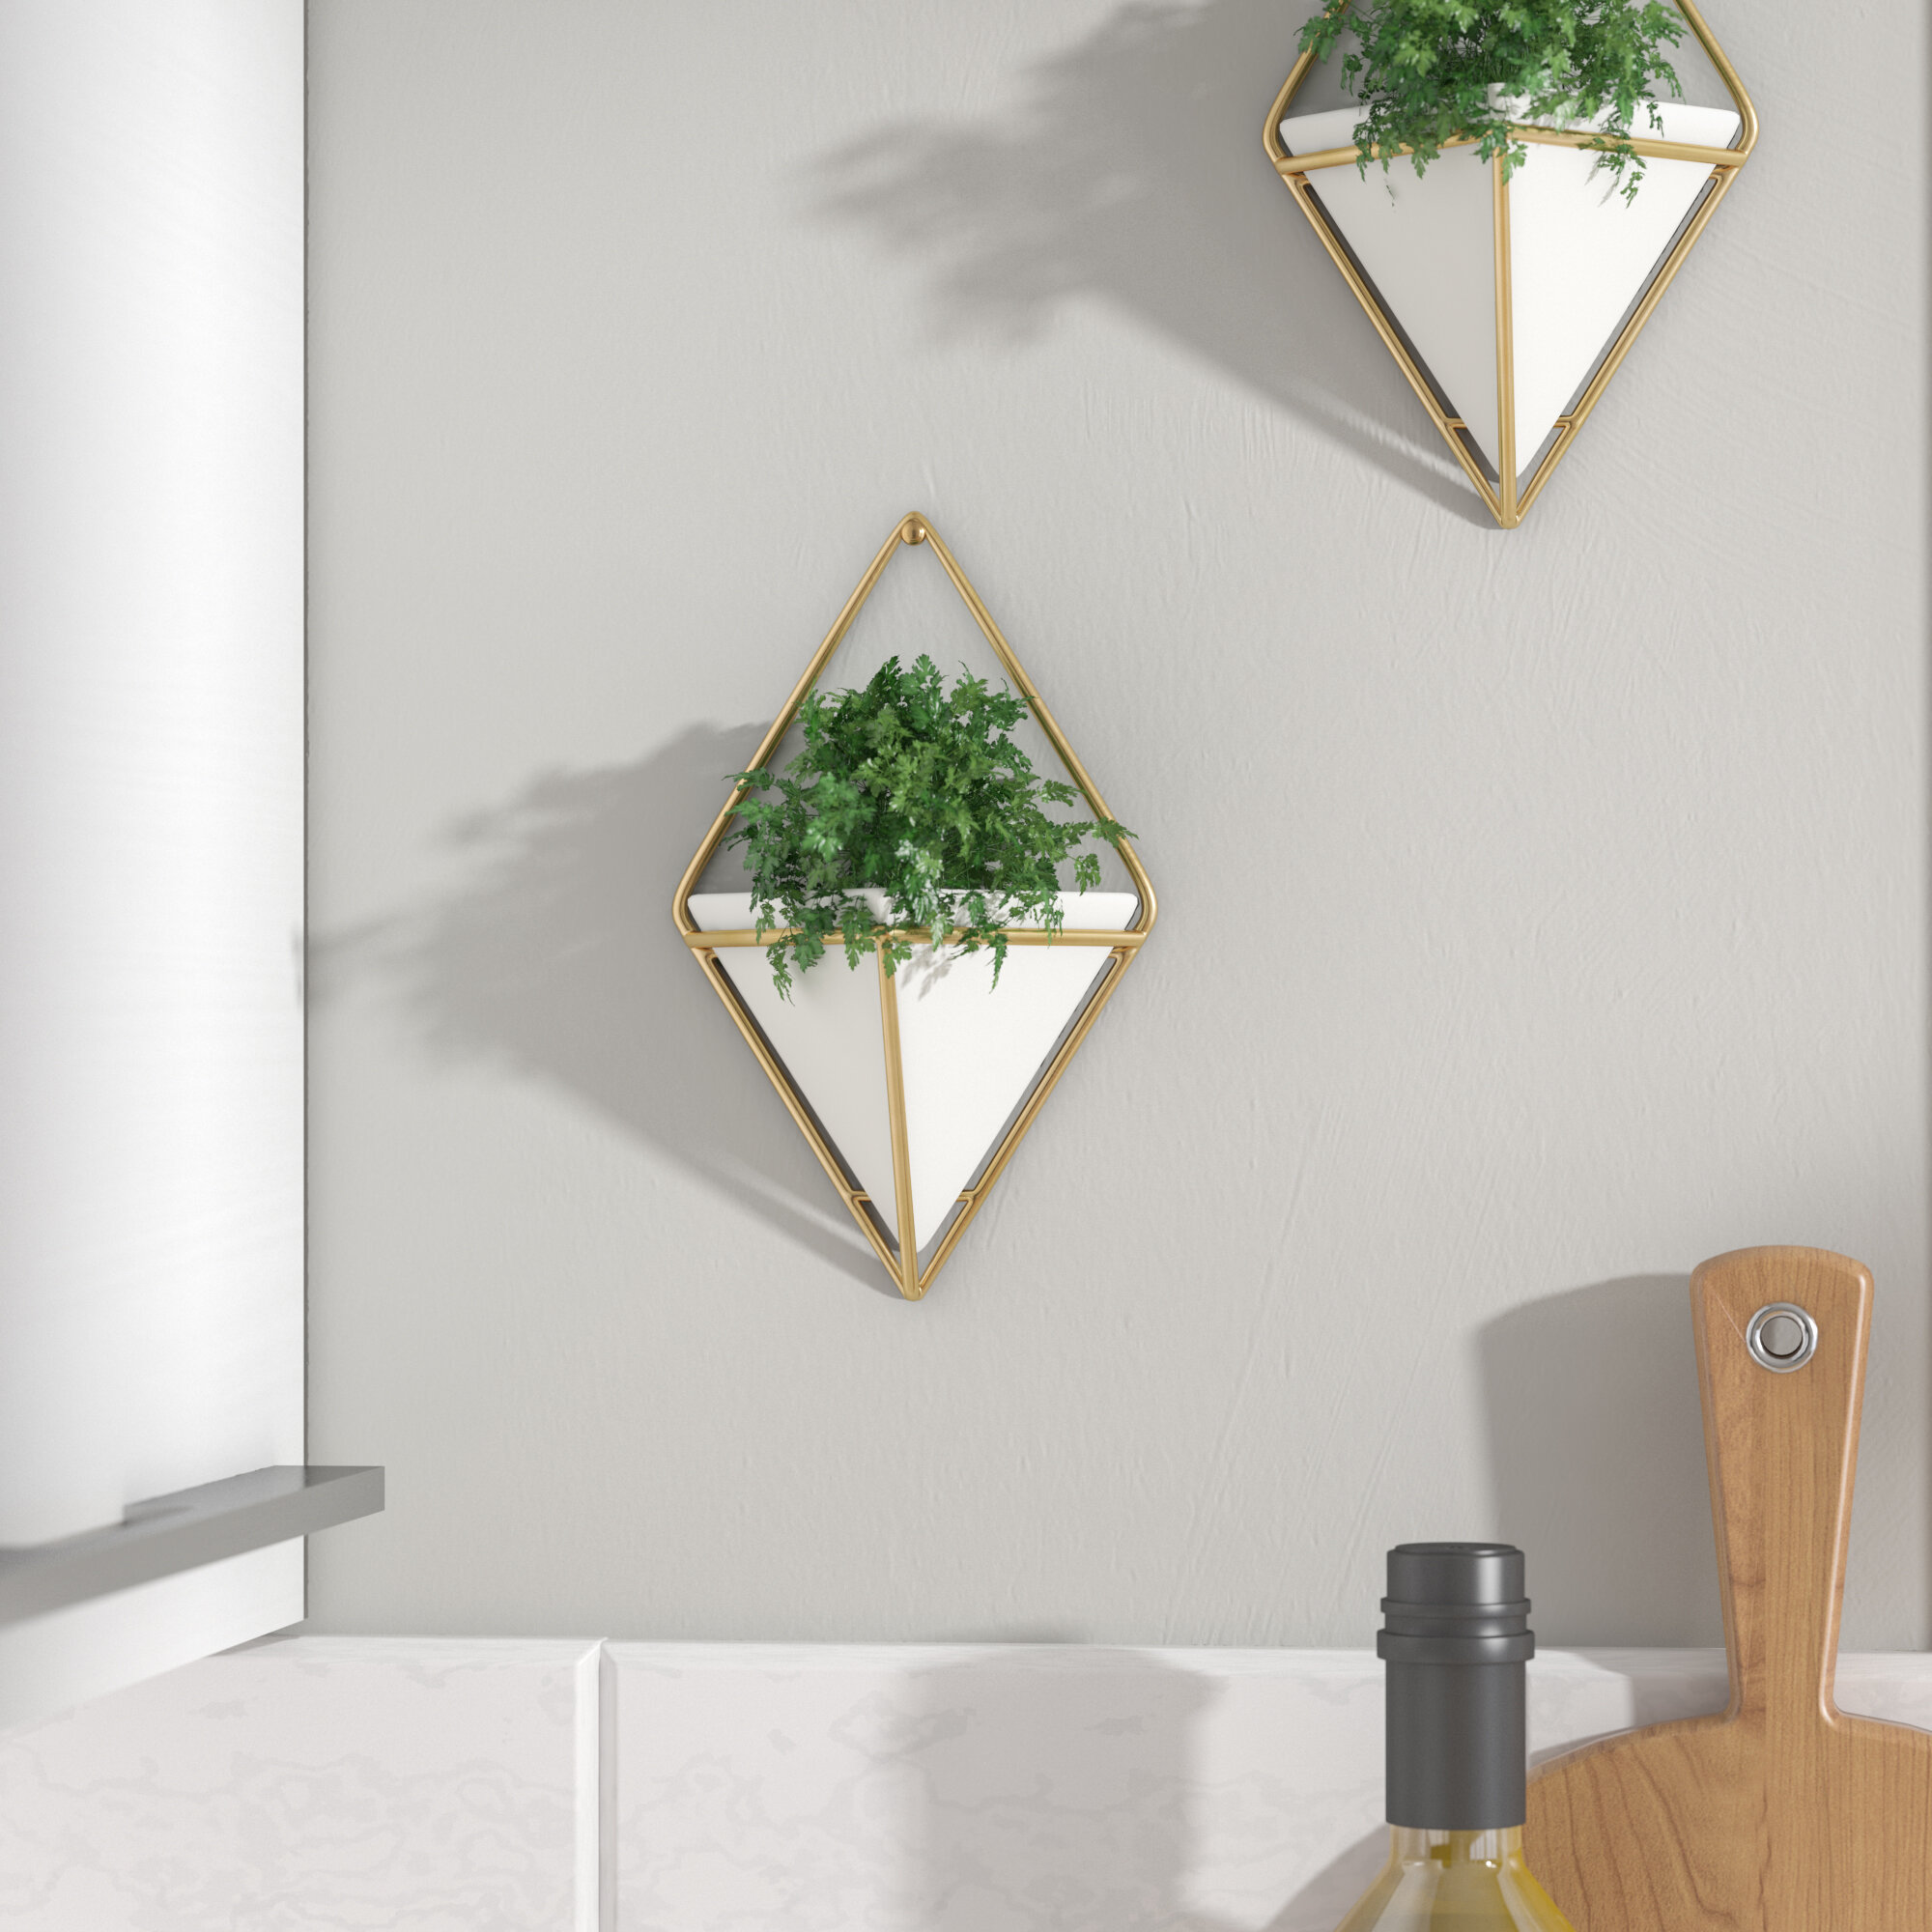 Brass Wall Accents You'll Love